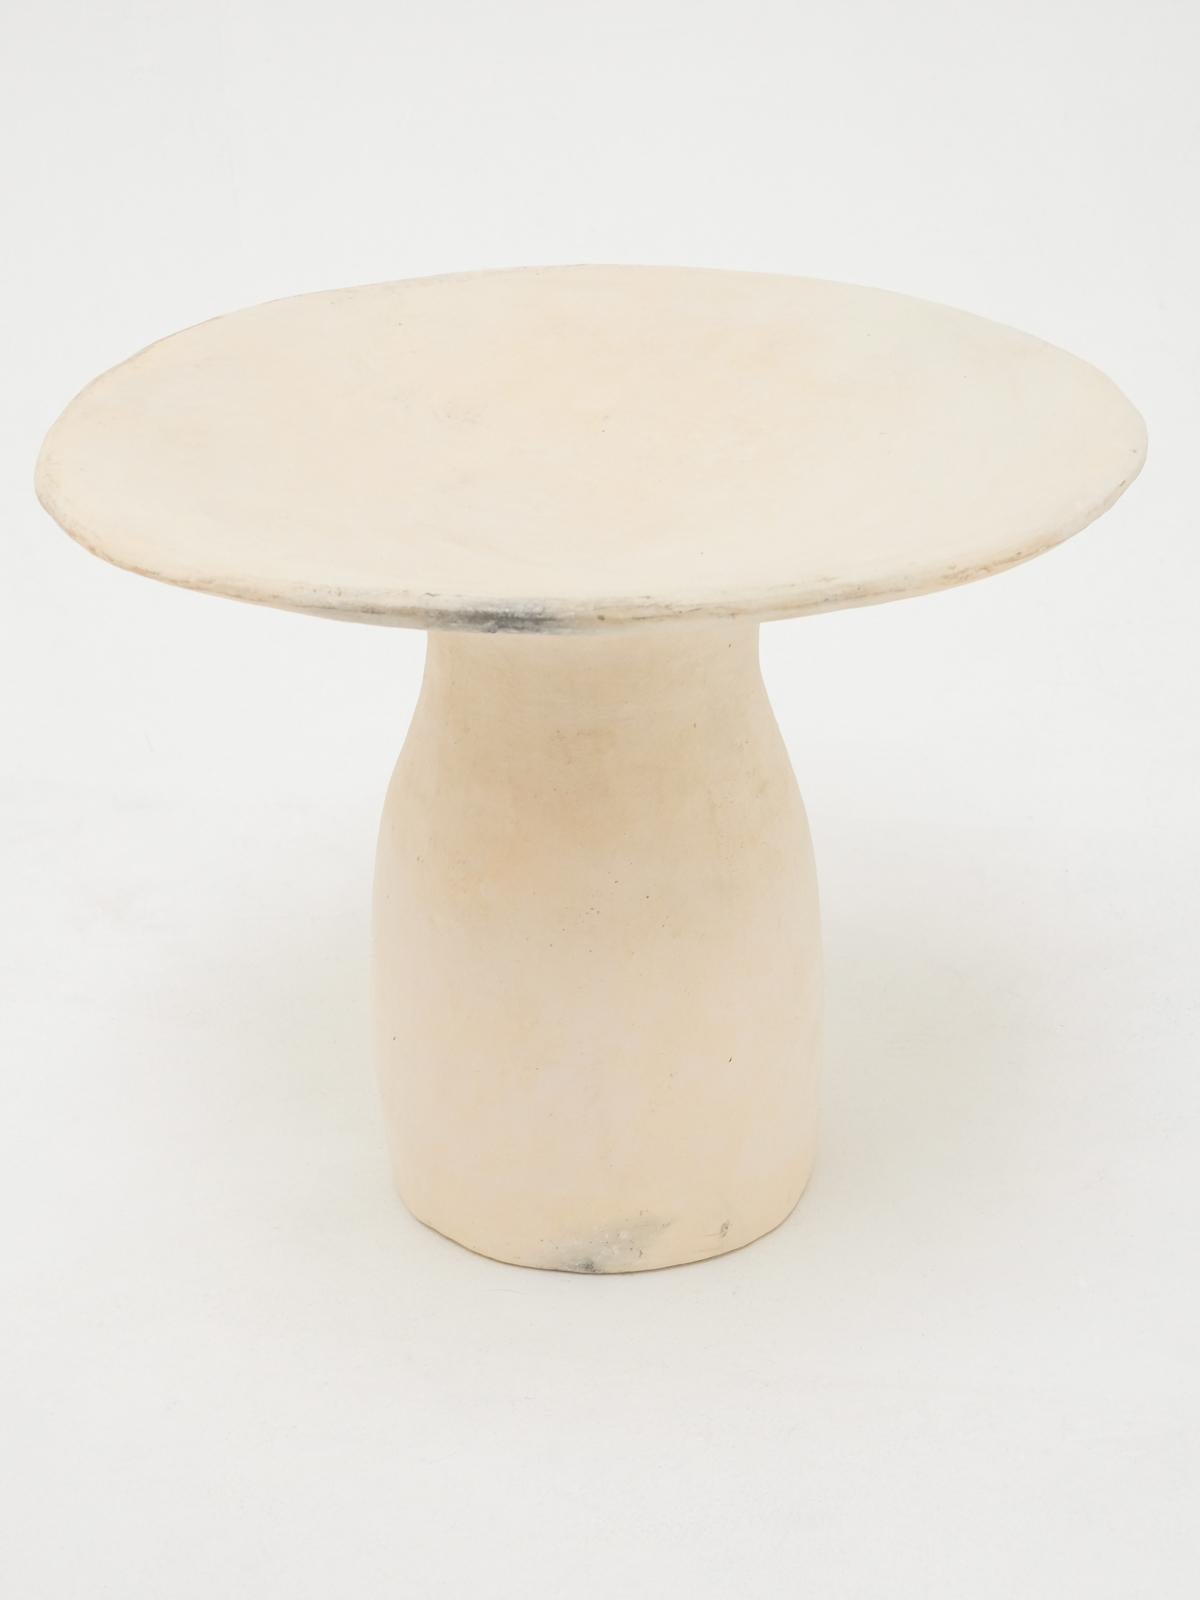 White Side Tables Made of local Clay, natural pigments, Handcrafted 1